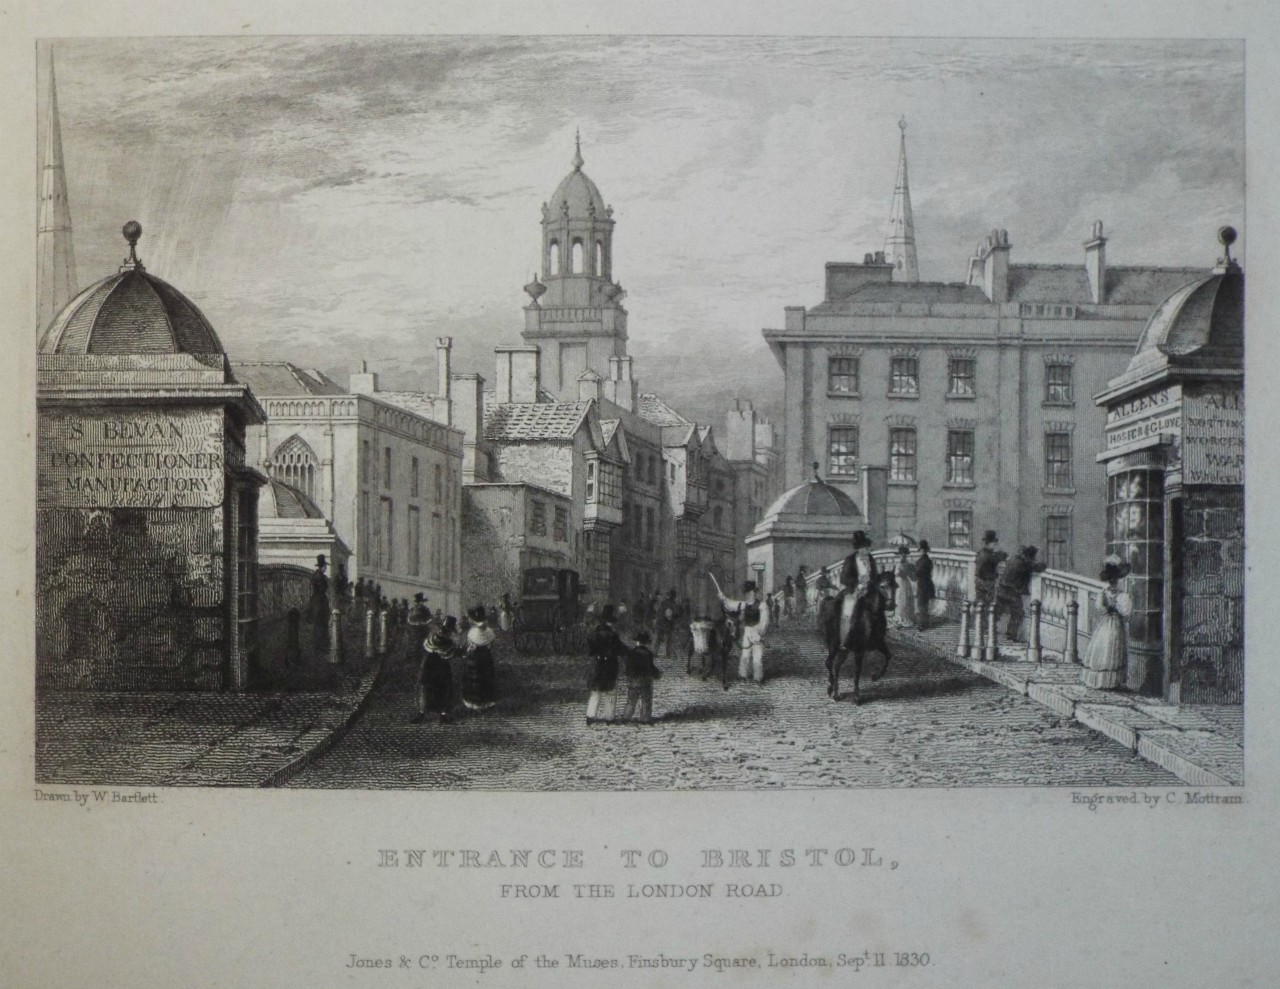 Print - Entrance to Bristol from the London Road. - Mottram